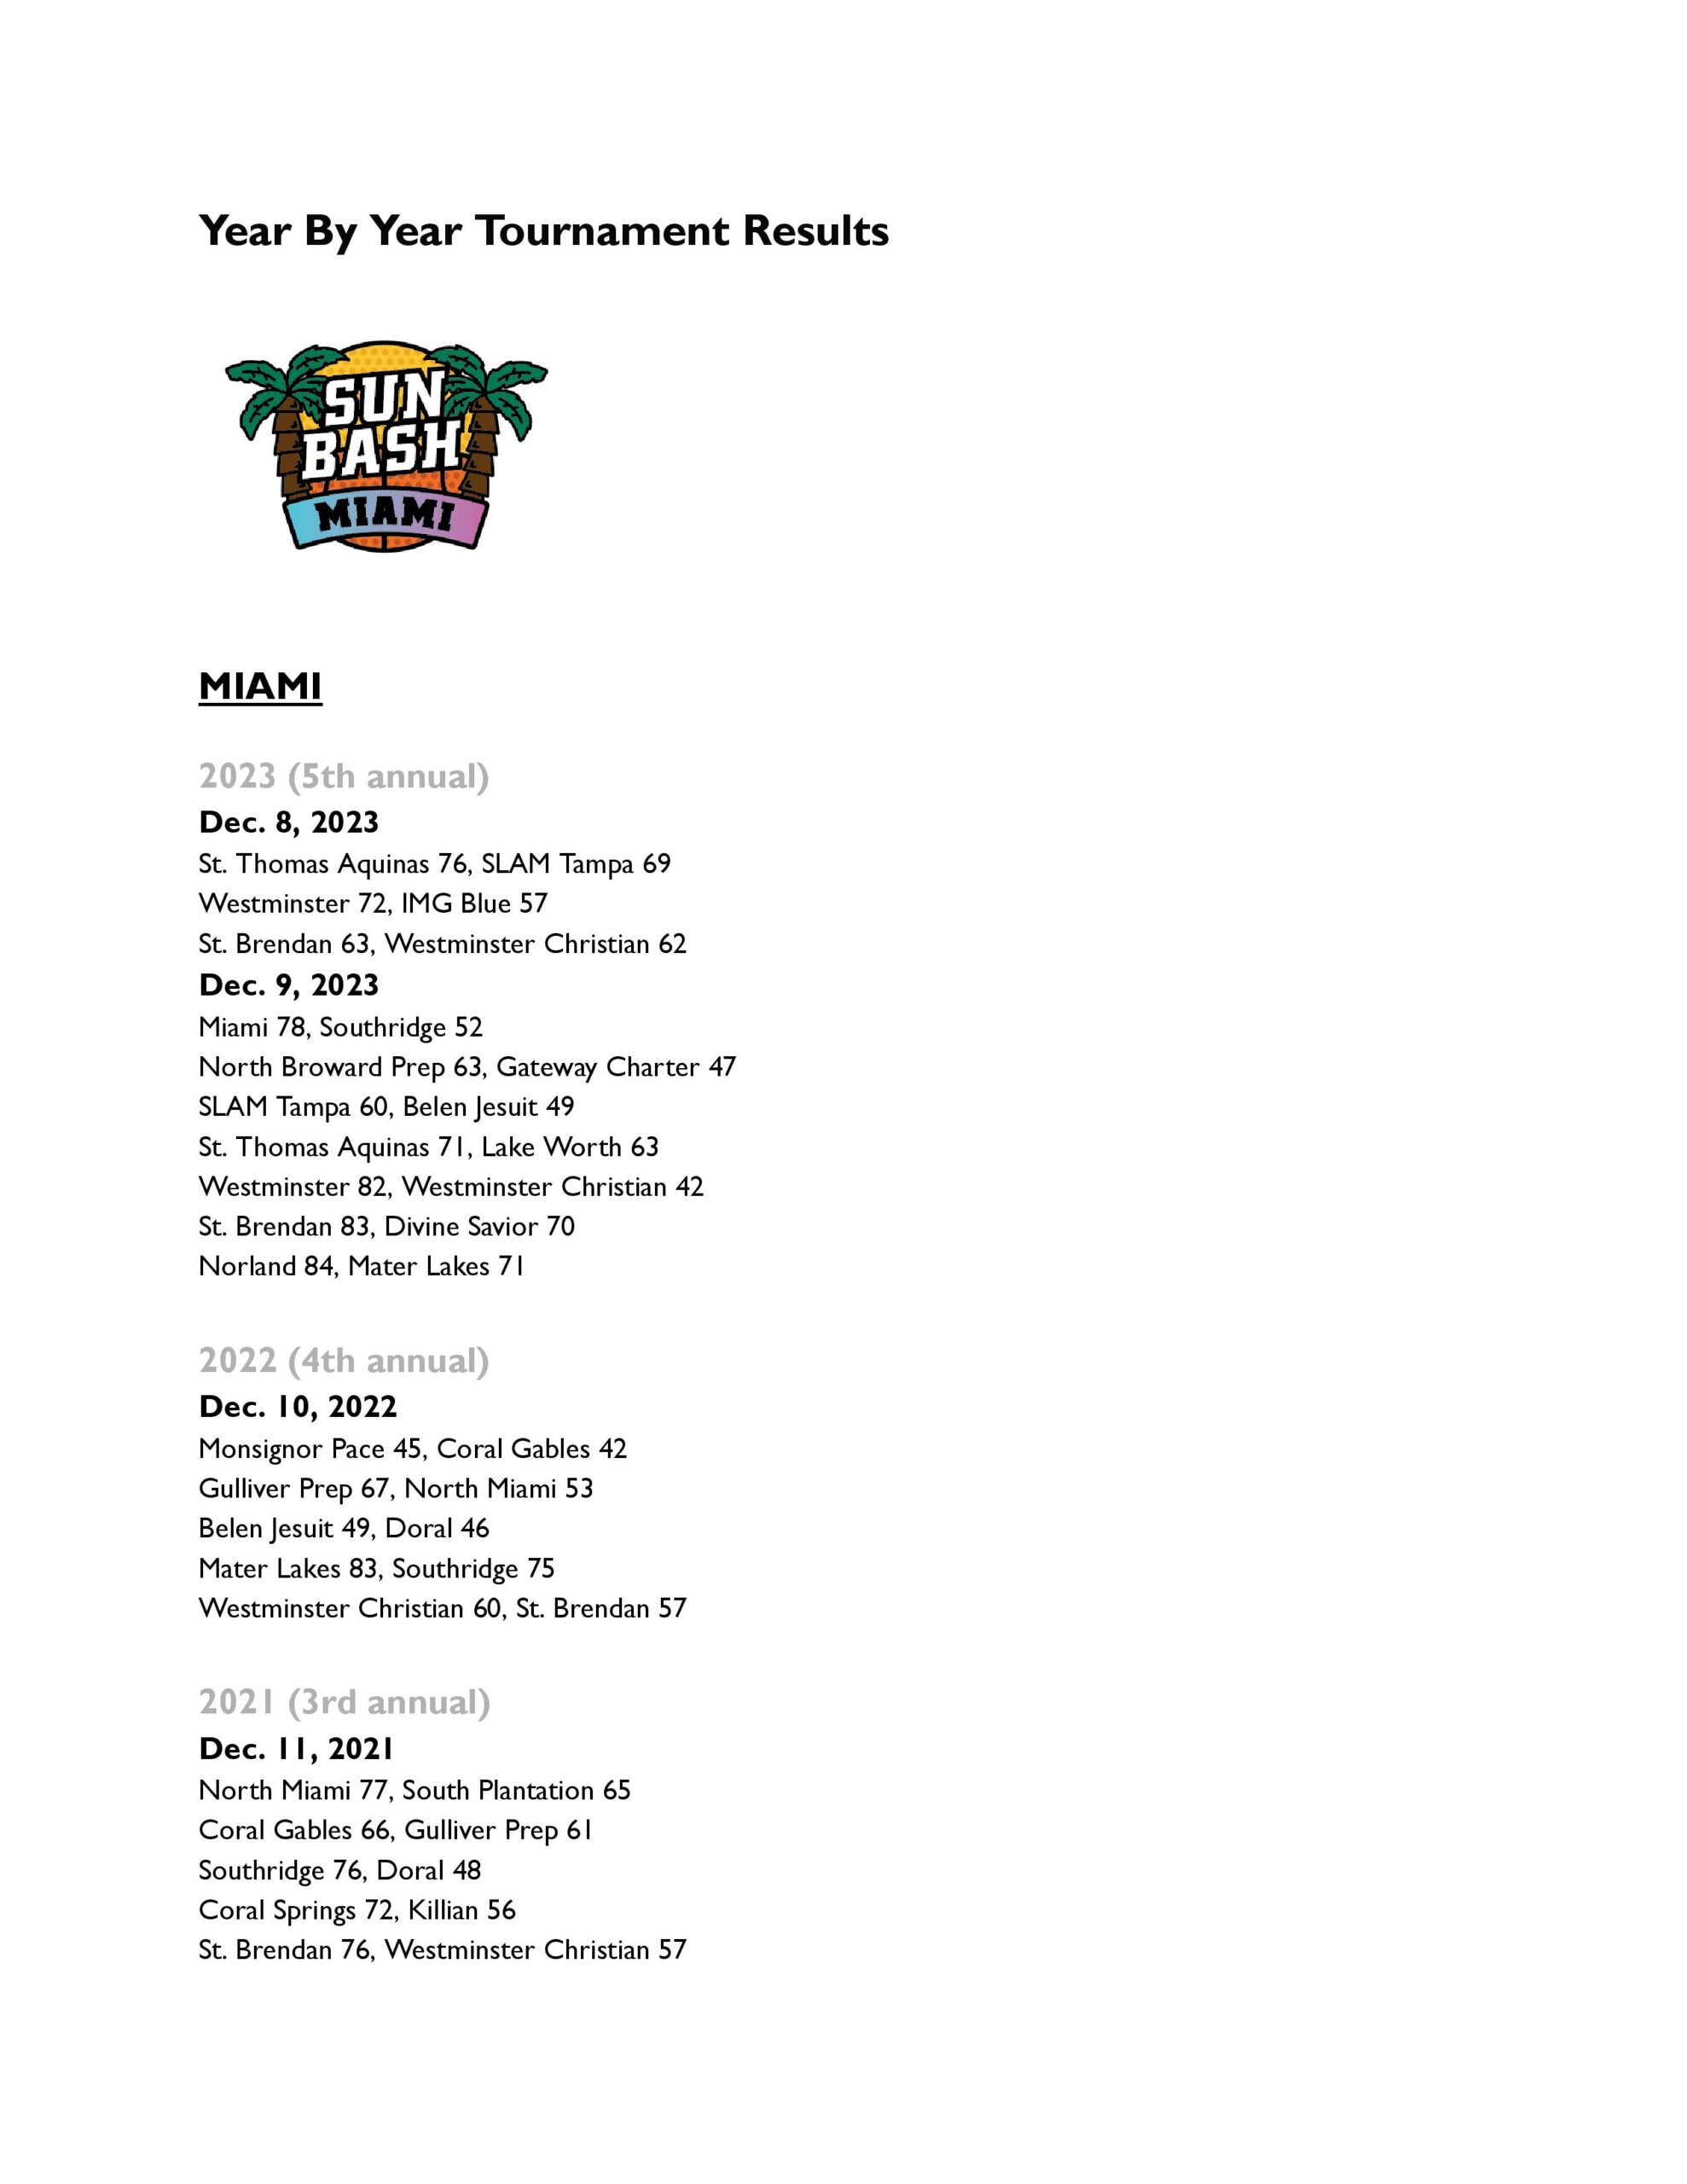 Year By Year Tournament Results Miami.docx-page-001